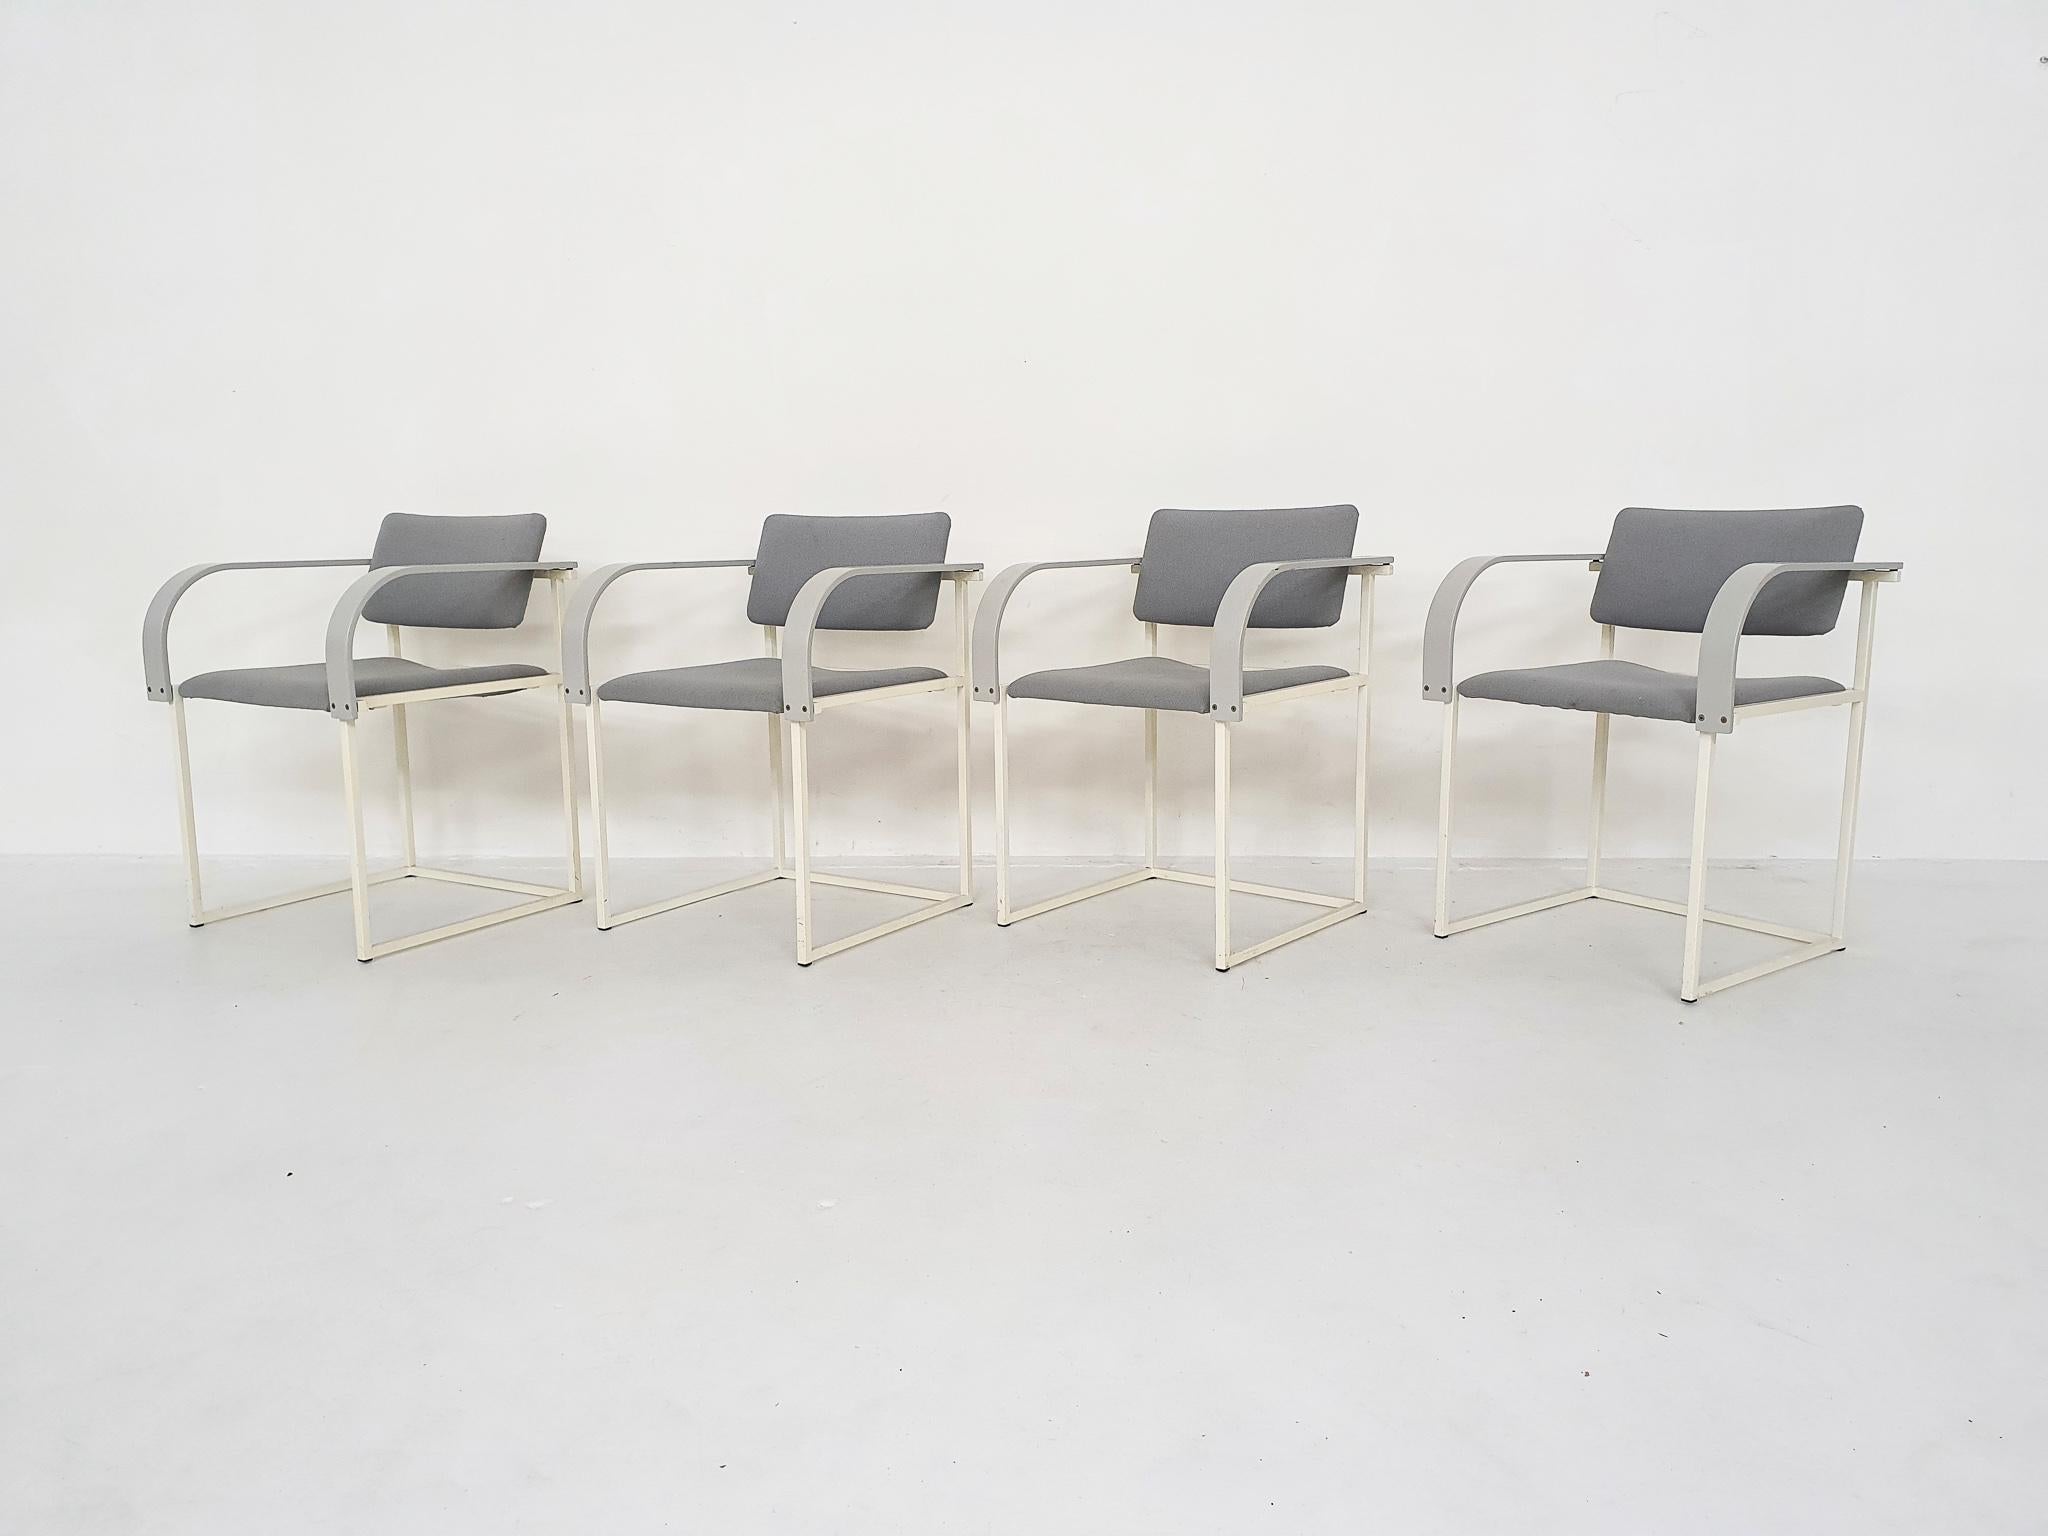 Set of four FM80 dining chairs by Pierre Mazairac and Karel Boonzaaijer, for Pastoe, The Netherlands 1980's
White metal dining chairs with grey wooden arm rests, and original grey upholstery.
Some traces of use to the fabric and frame.